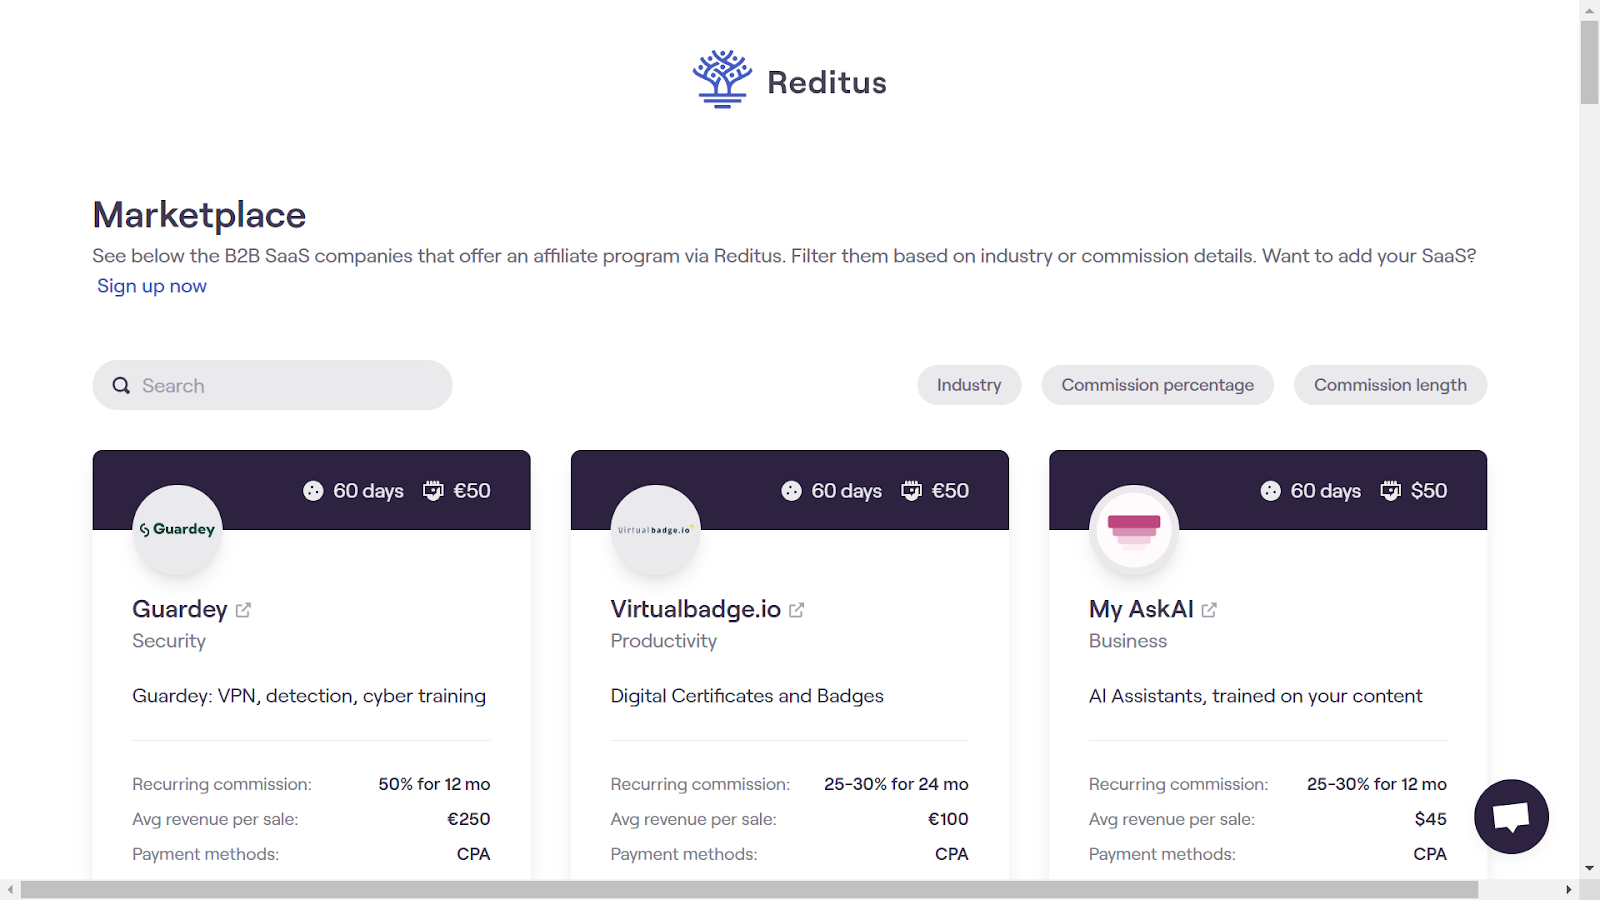 A screenshot form the Reditus Marketplace focused on B2B SaaS industry.